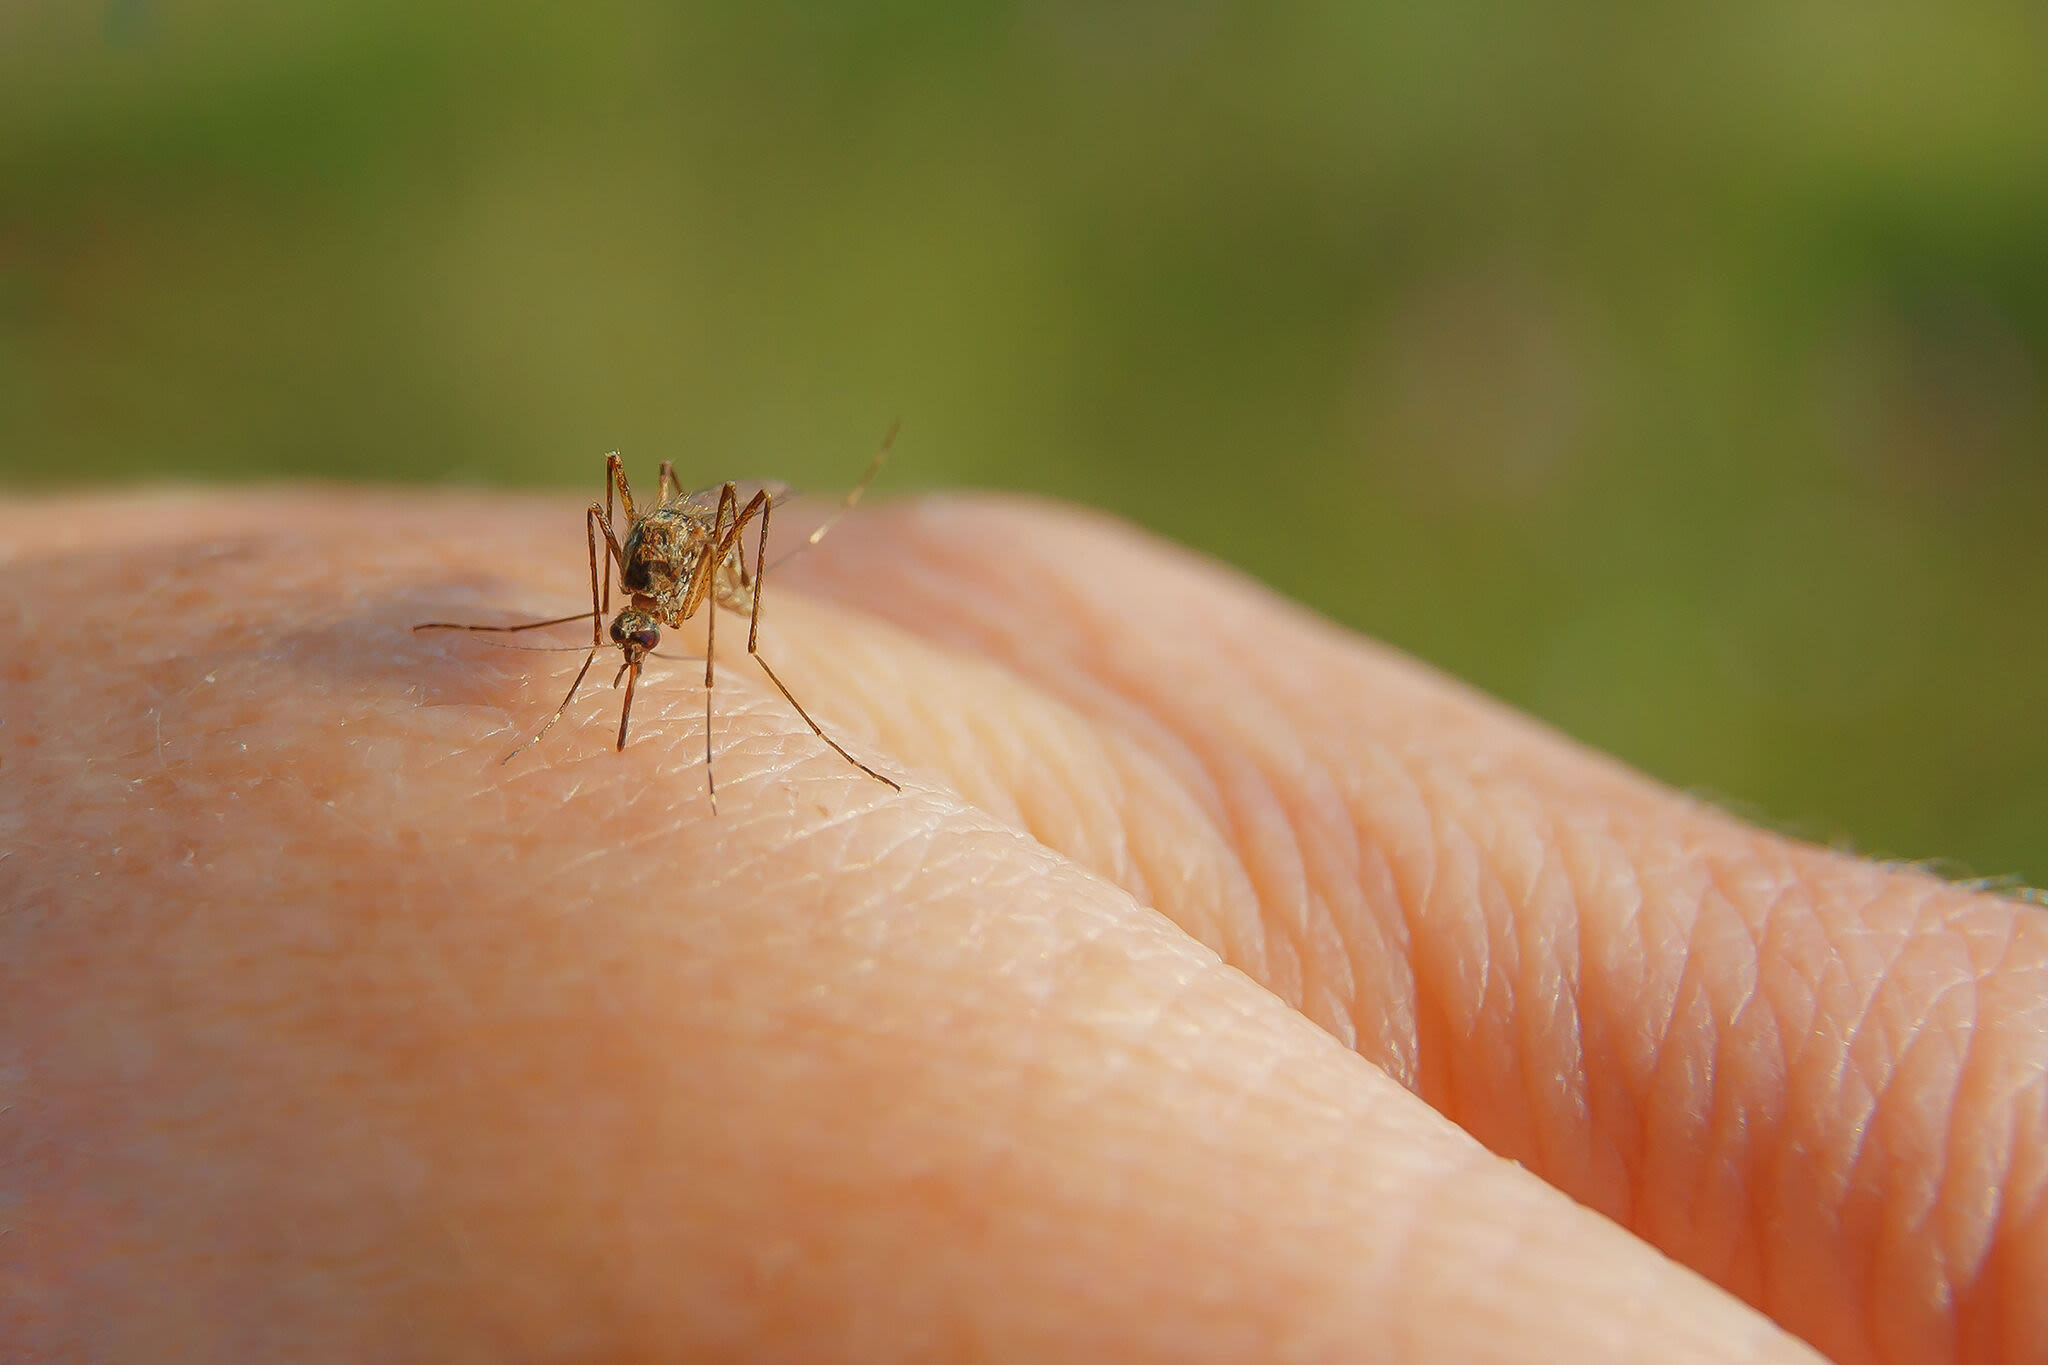 How to protect against West Nile Virus in Midland County